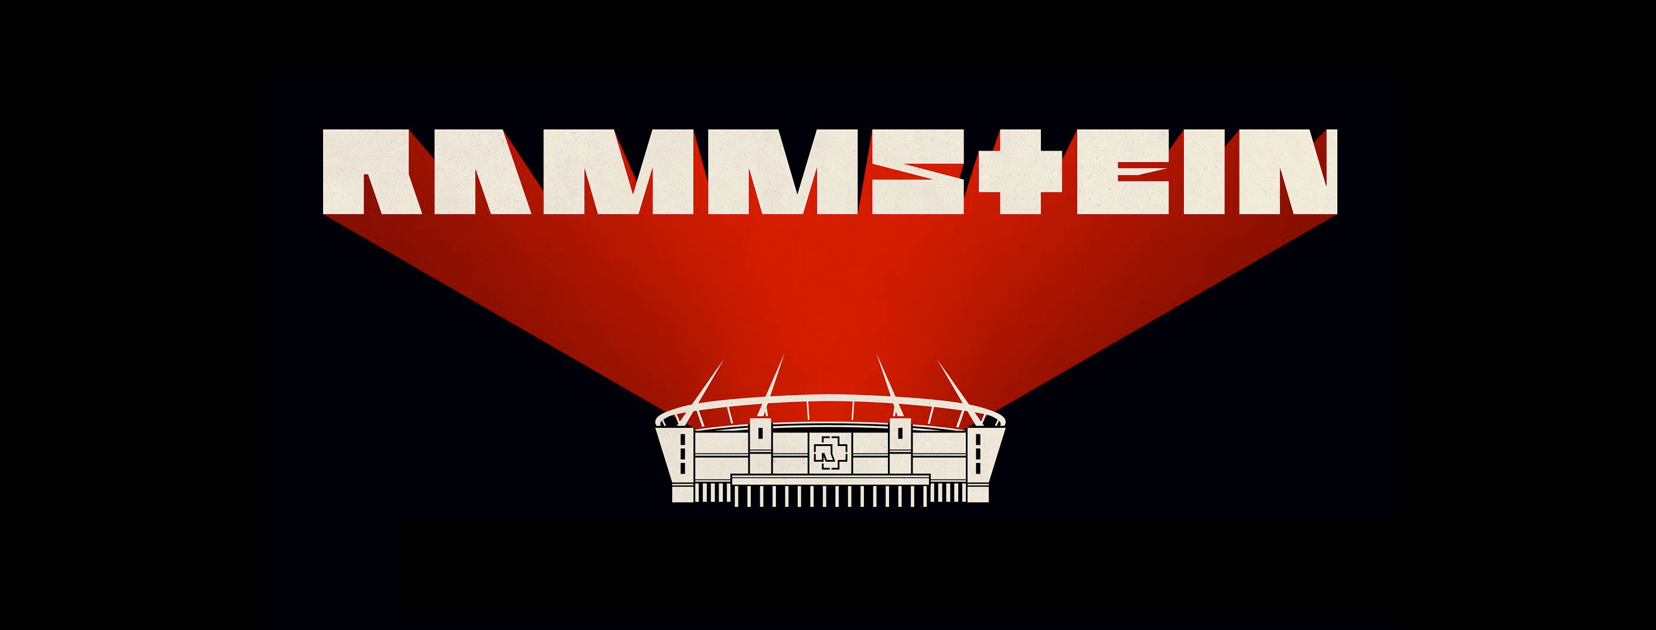 Rammstein at Tampere Finland  Aug 2019 Fridge Magnet Large 90 mm x 60 mm